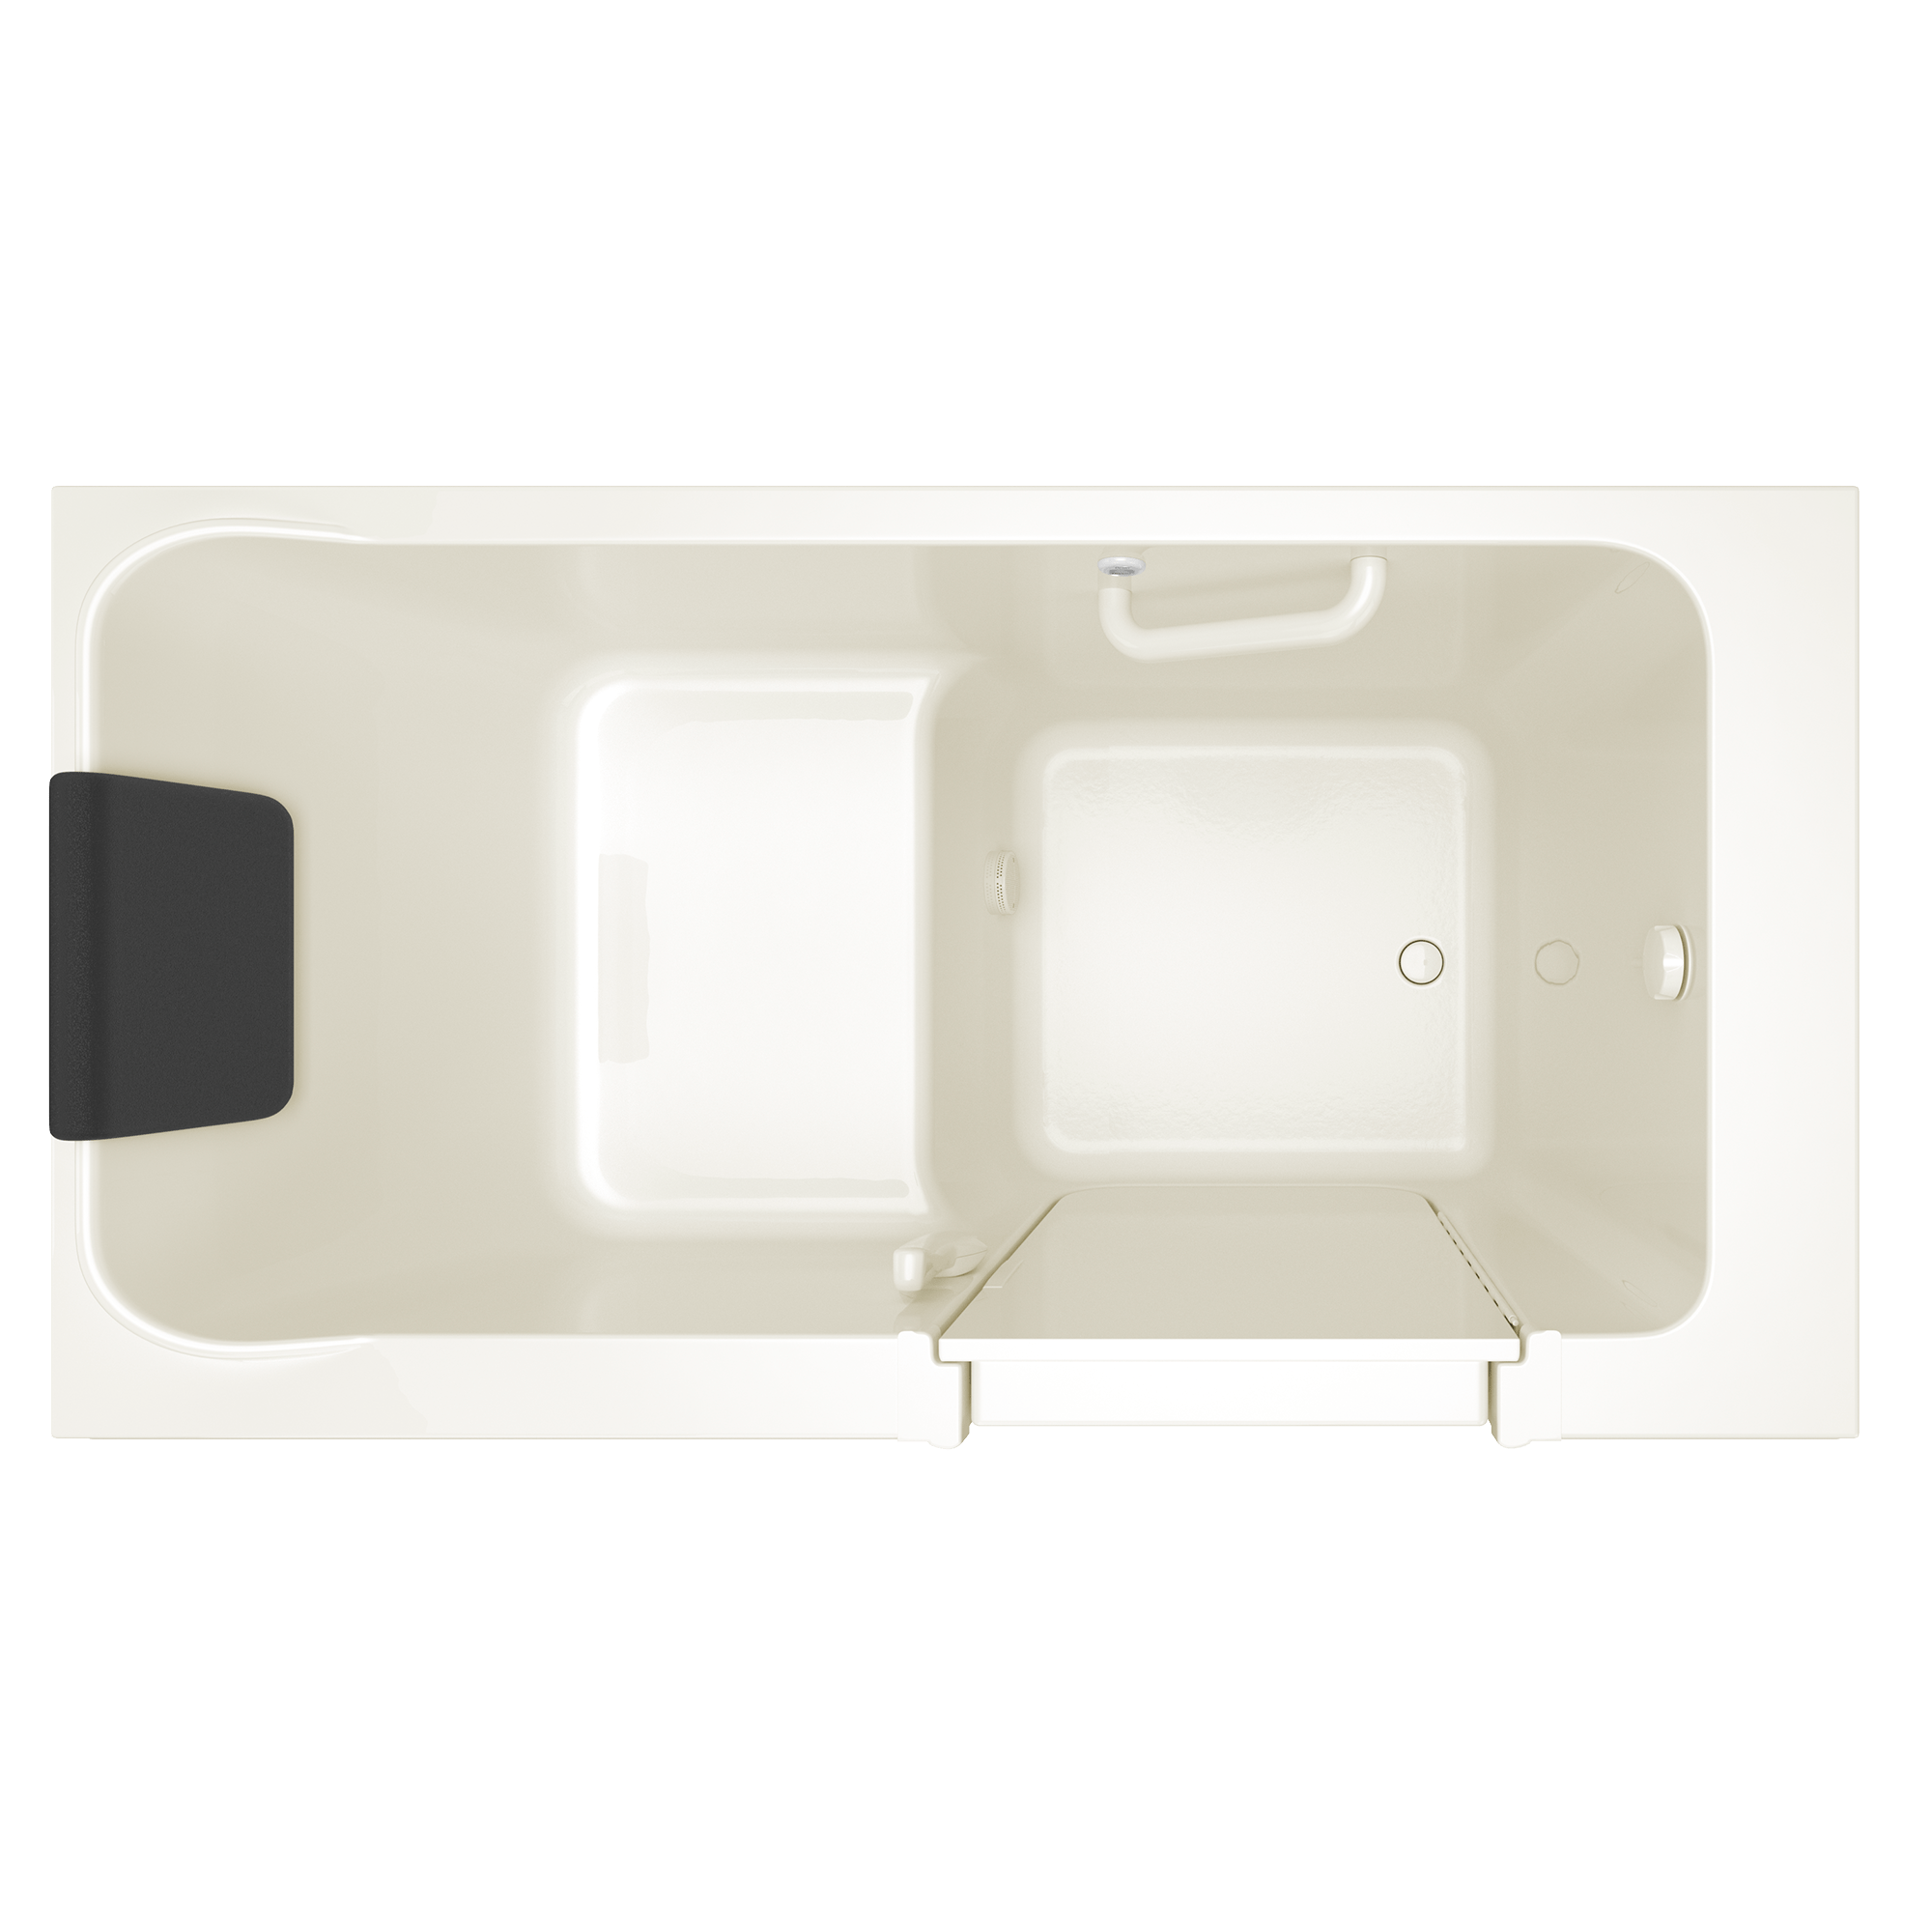 Acrylic Luxury Series 32 x 60 -Inch Walk-in Tub With Soaker System - Right-Hand Drain